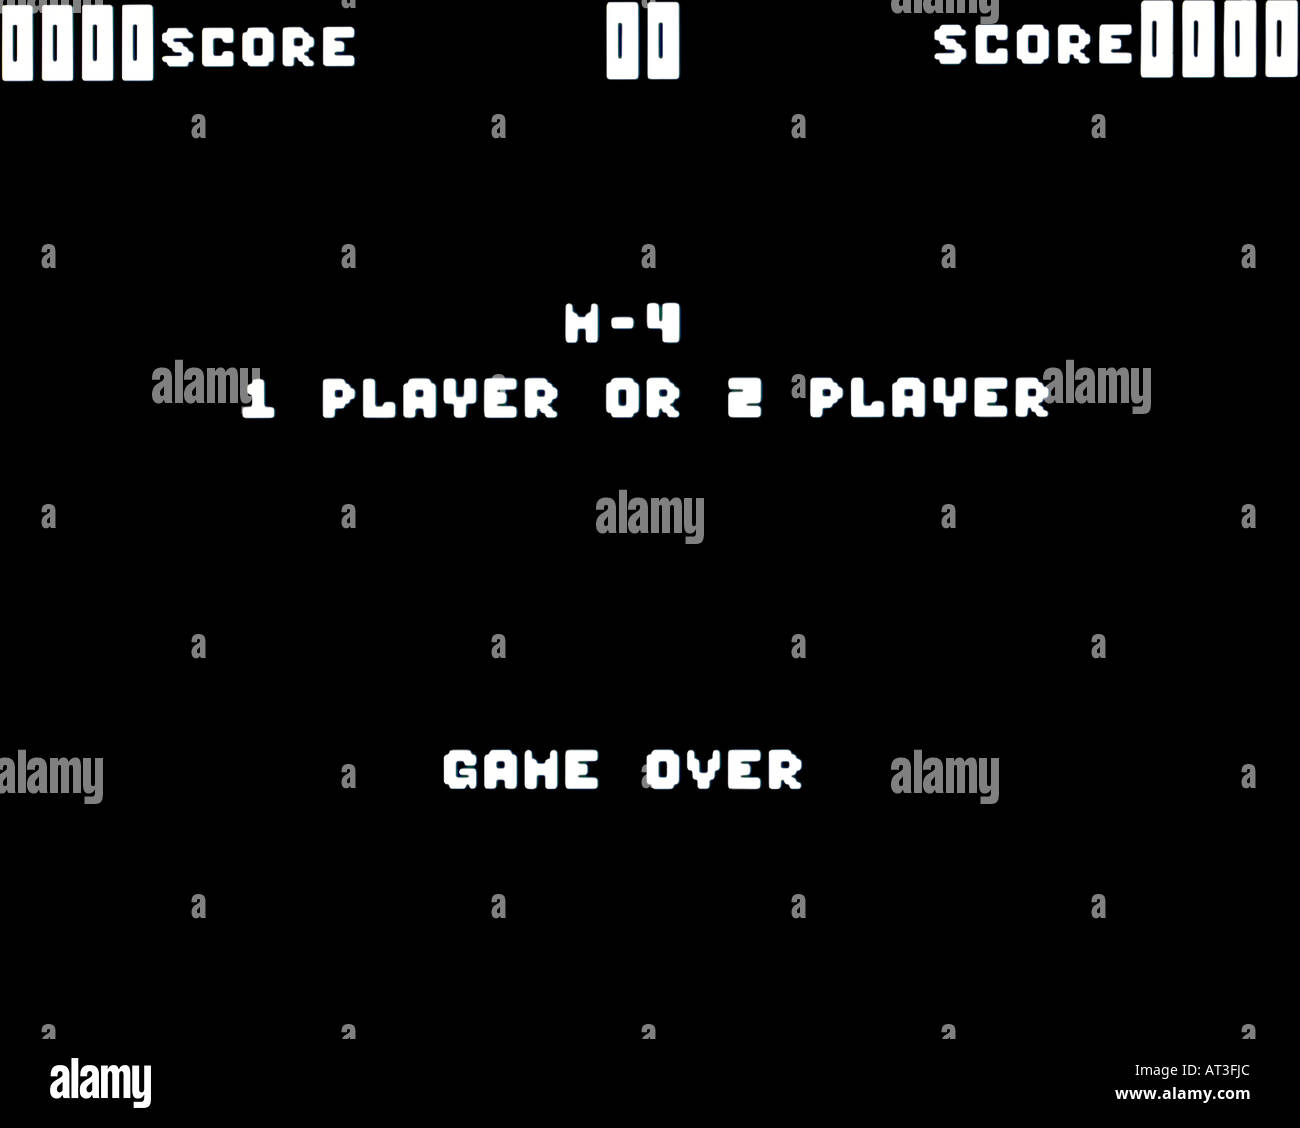 M 4 Midway 1977 vintage arcade videogame screenshot - Editorial Use Only Stock Photo